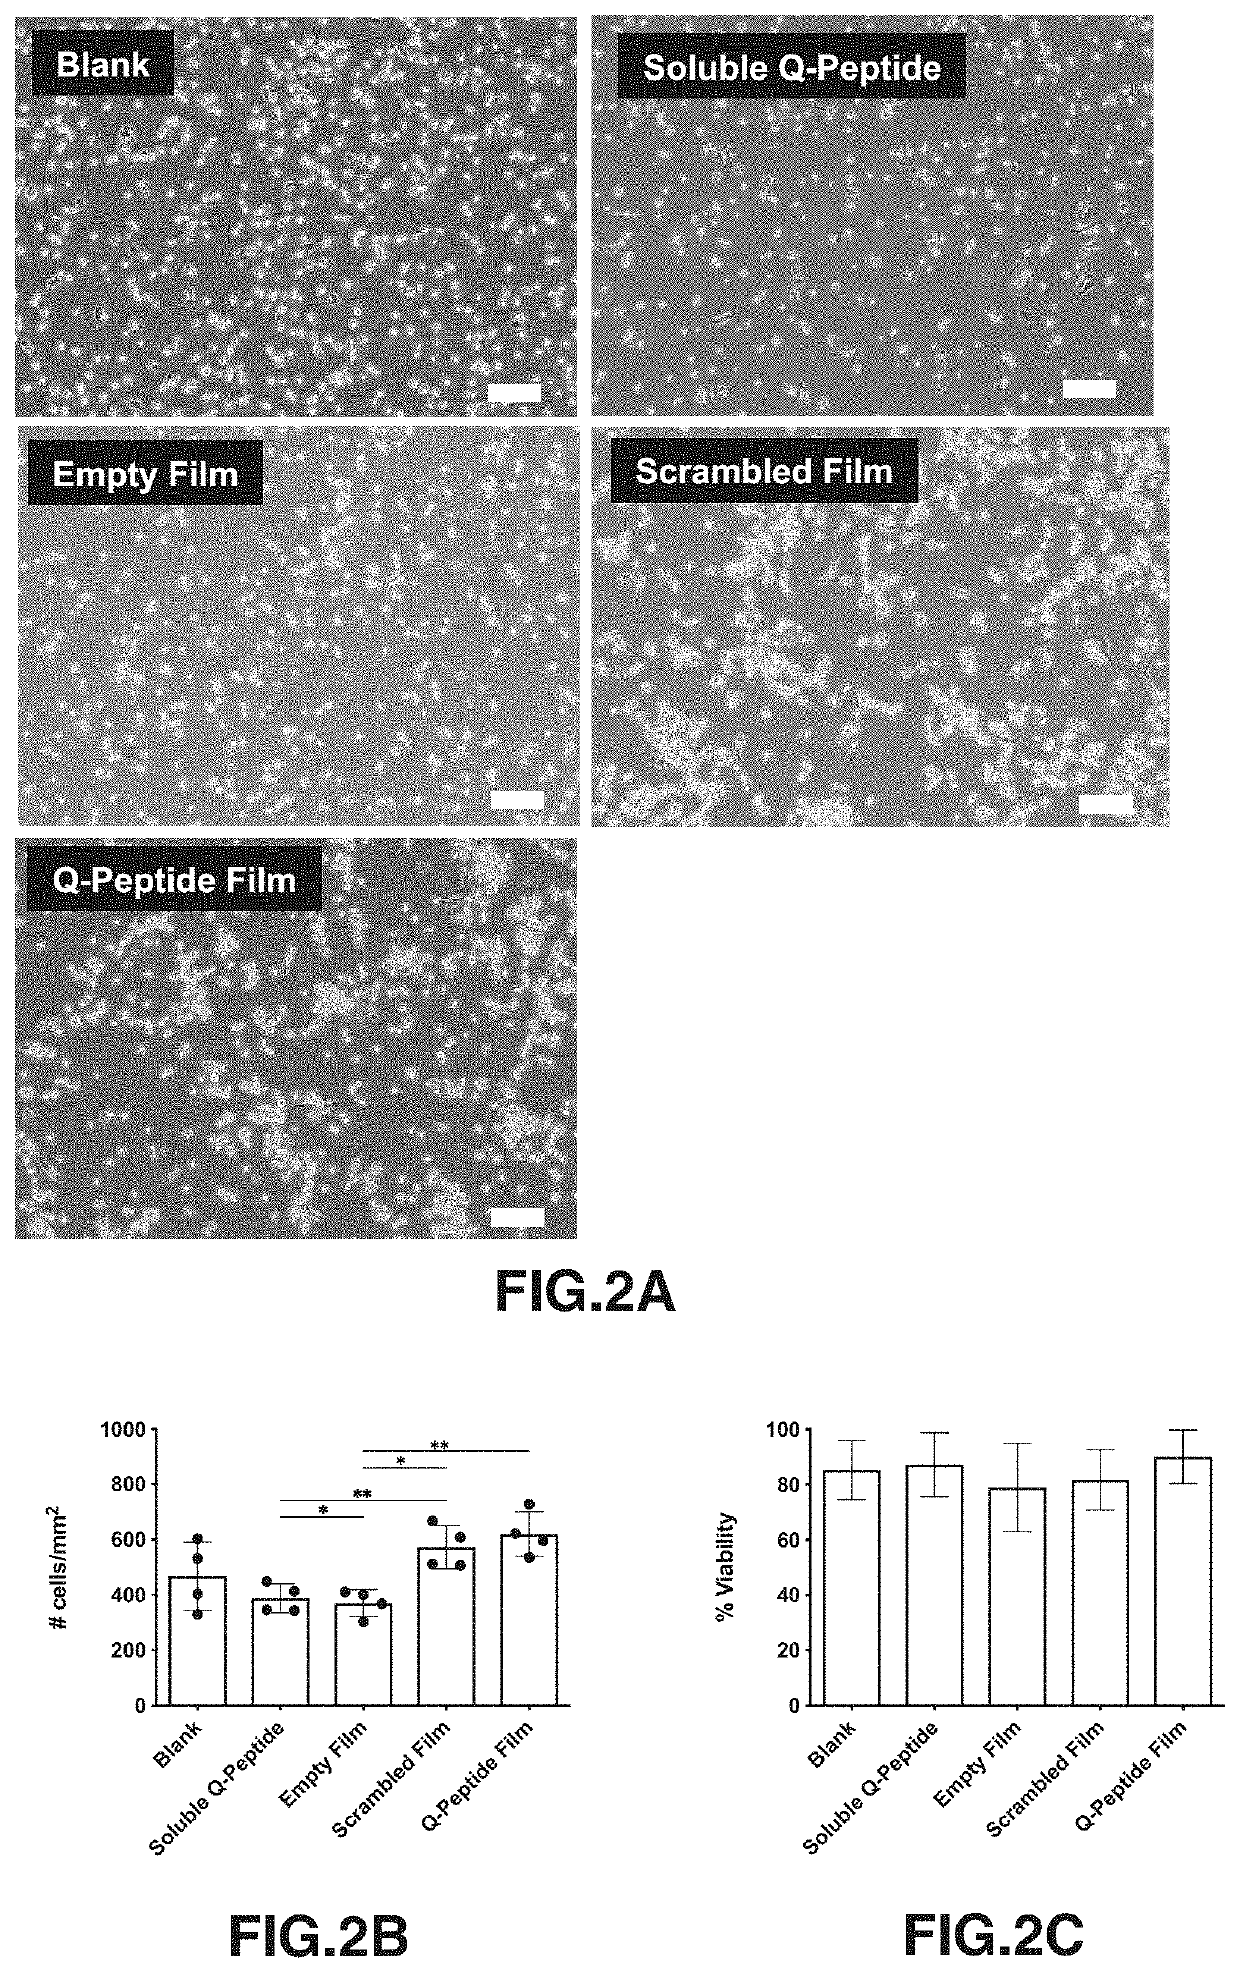 Q-peptide hydrogel promotes immune modulation and macrophage differentiation